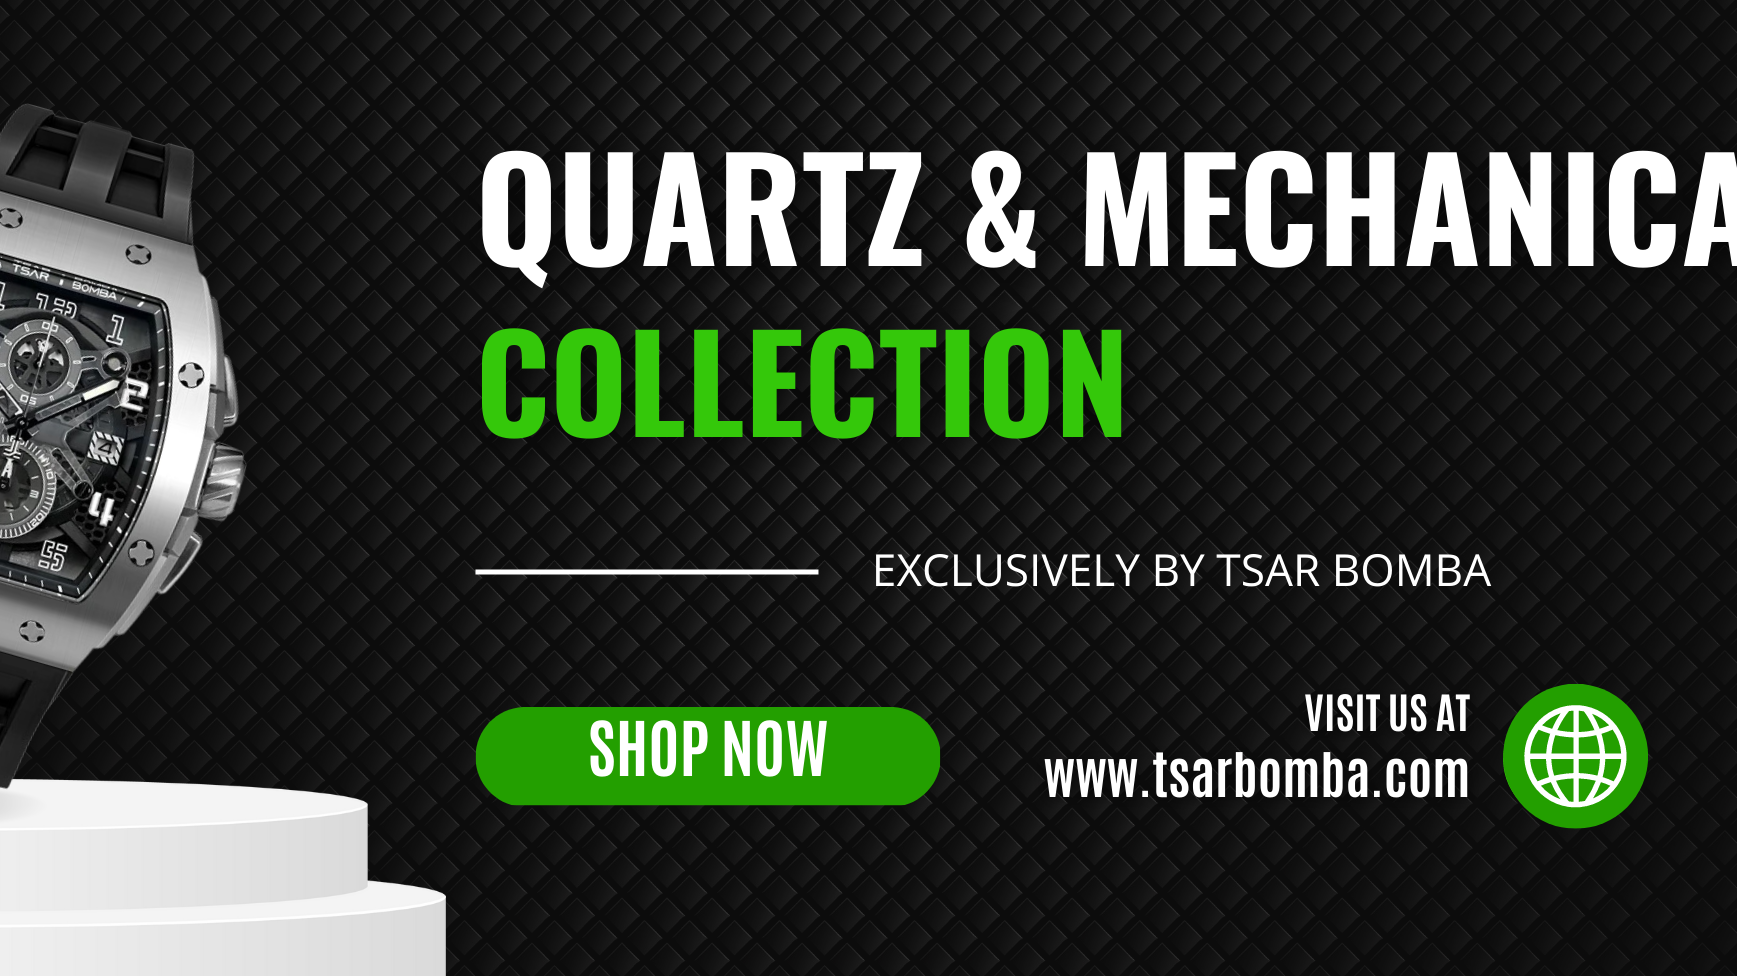 Quartz Watch And Mechanical Watches Collection